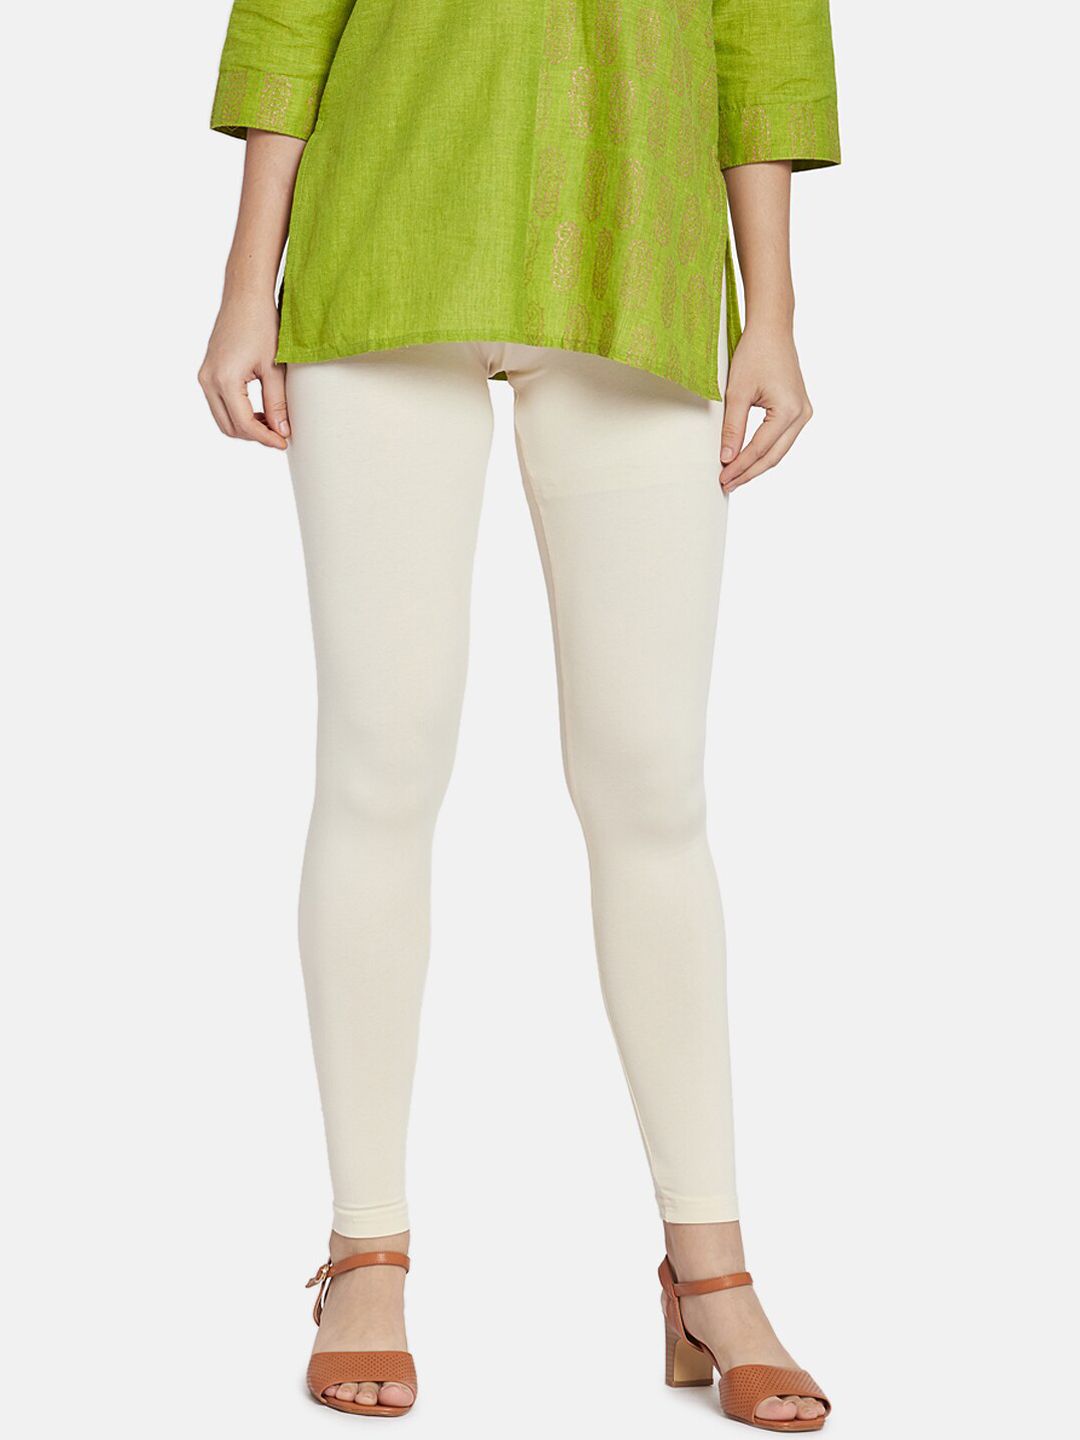 Go Colors Women Cream Coloured Solid Ankle Length Slim Fit Cotton Leggings Price in India